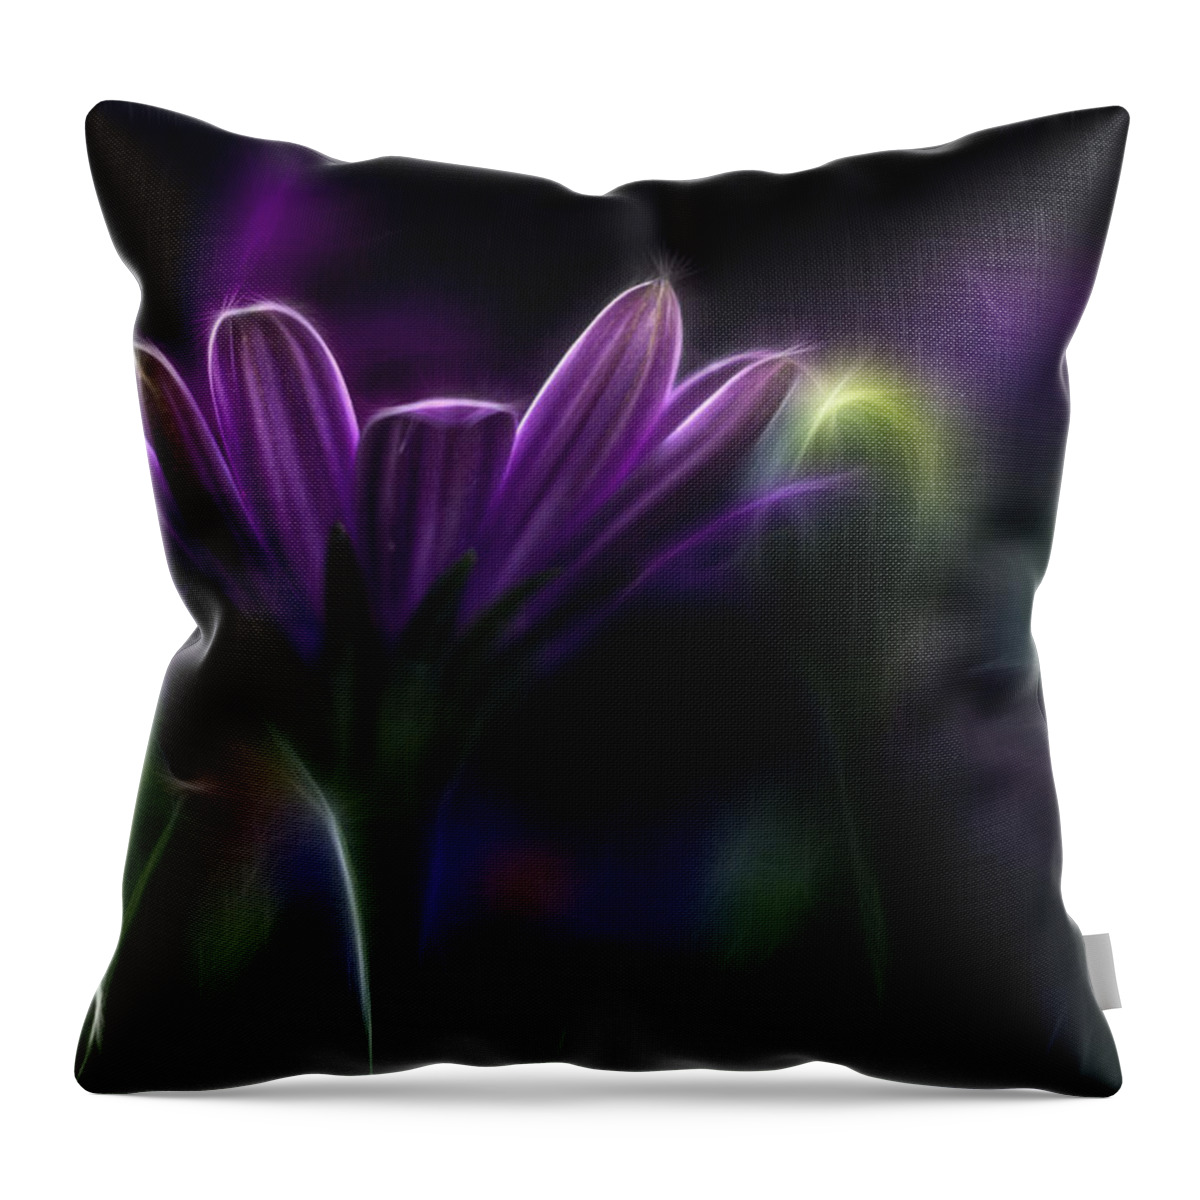 Abstract Throw Pillow featuring the photograph Purple Daisy #2 by Stelios Kleanthous